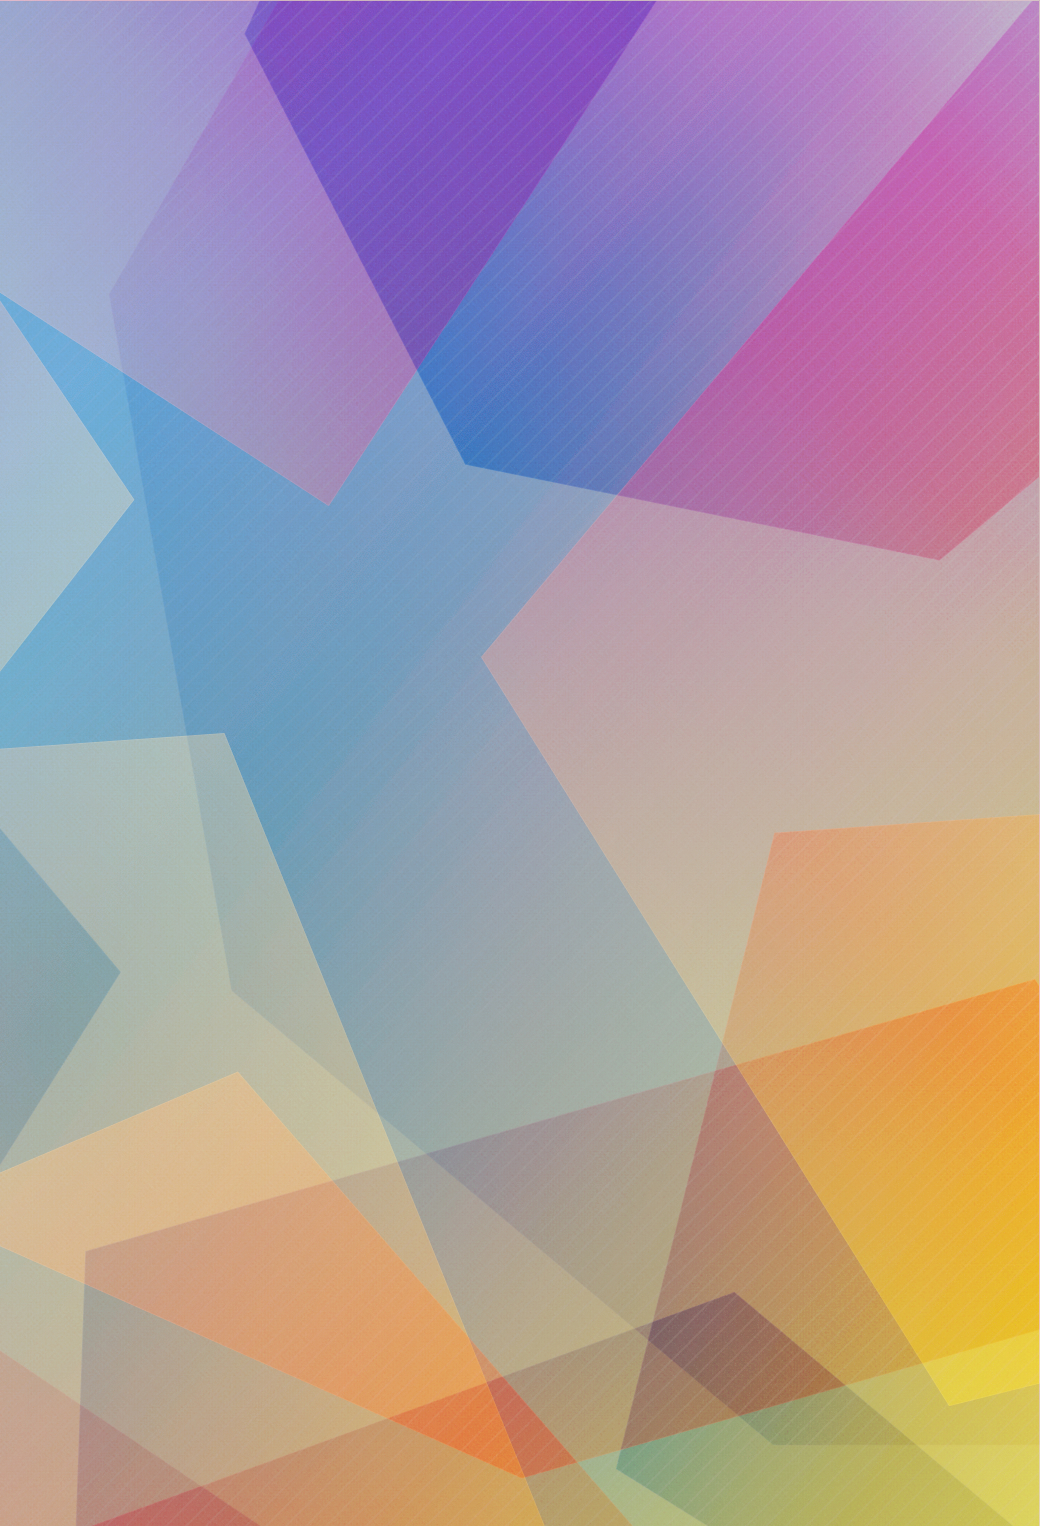 Wallpapers of the week: parallax ready walls for iOS 7